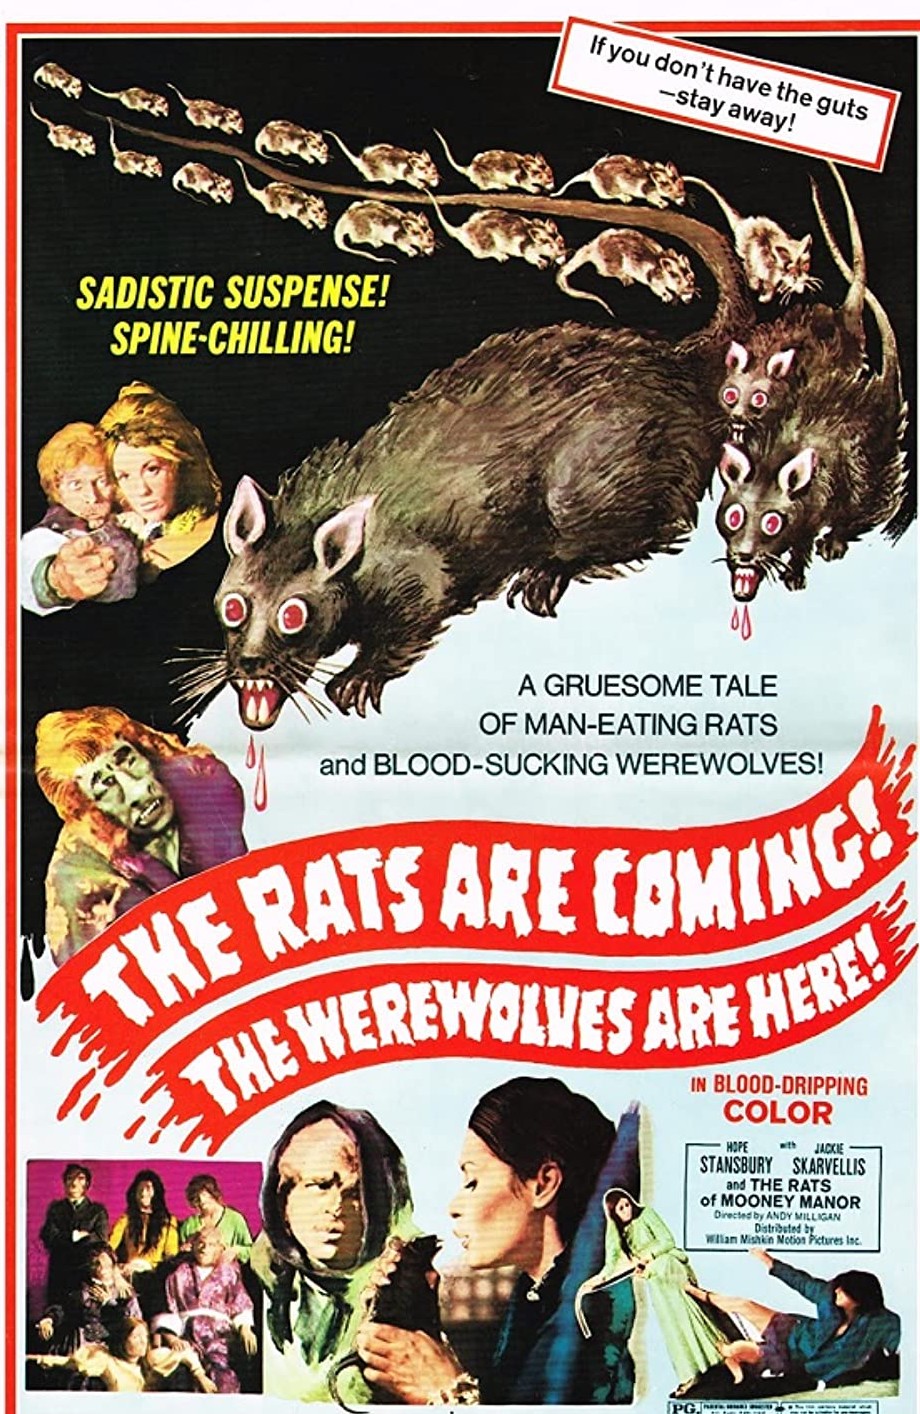 The movie poster for The Rats Are Coming! The Werewolves Are Here!